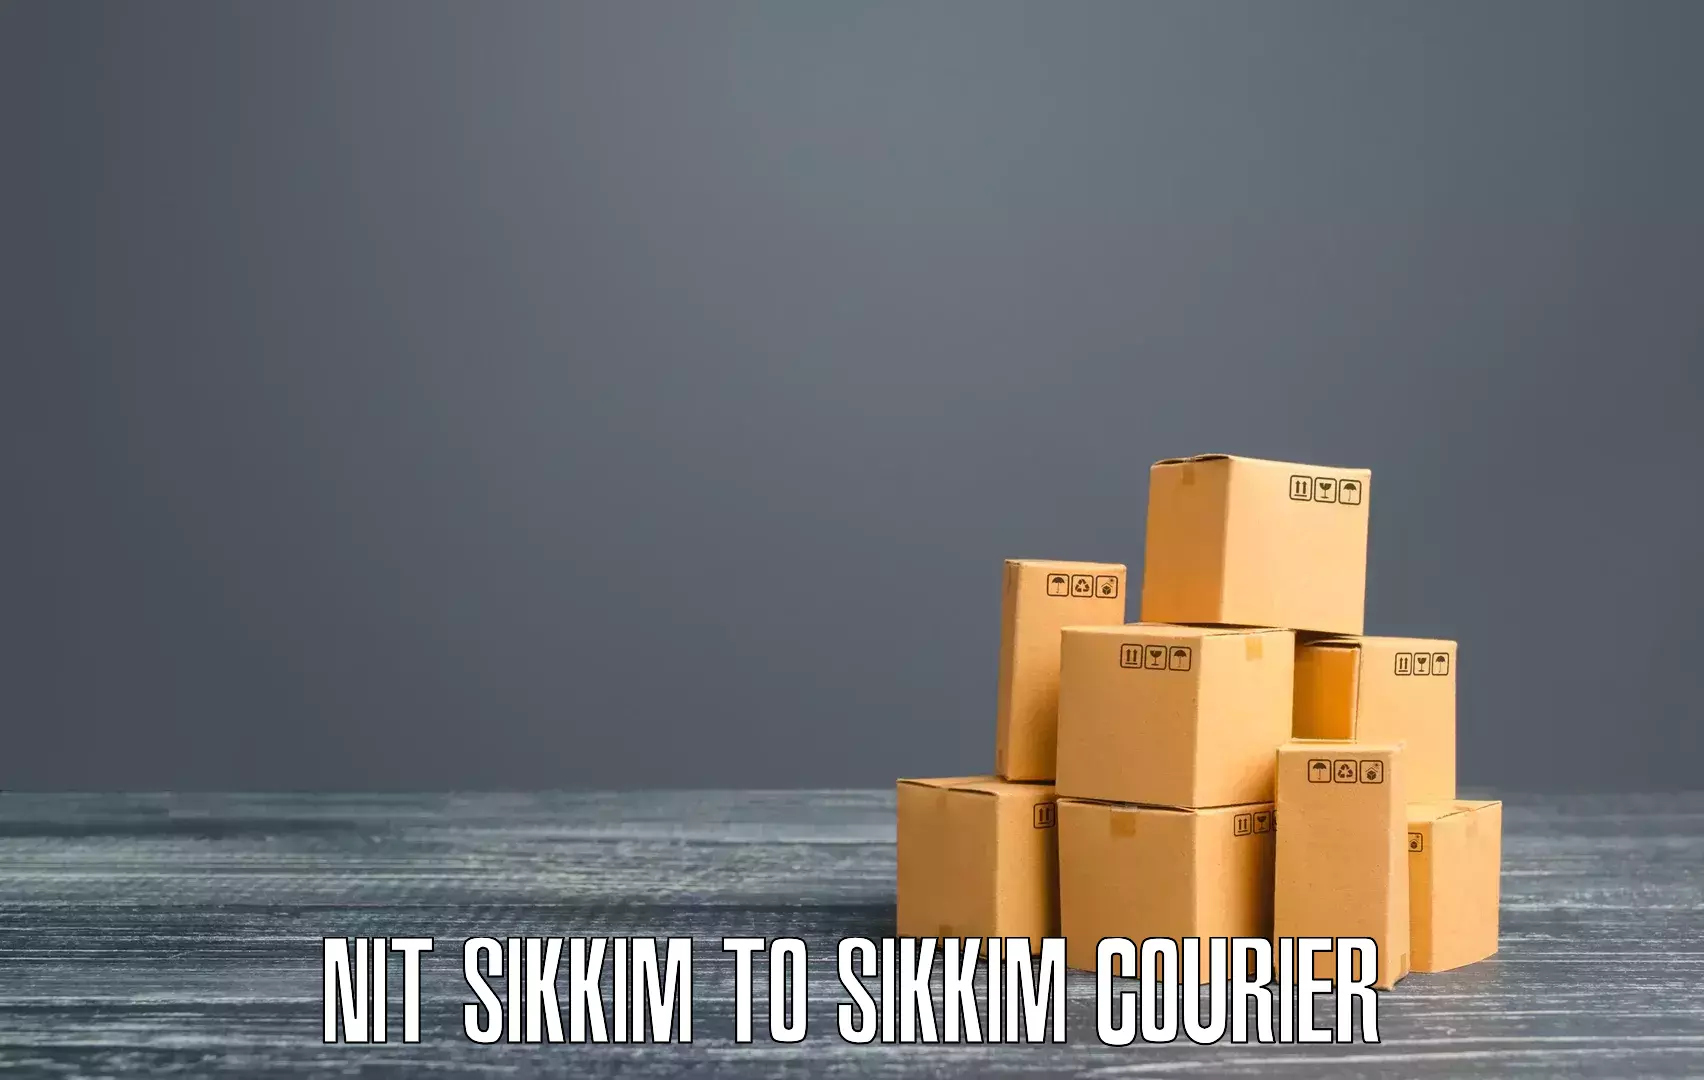 Advanced shipping network NIT Sikkim to Sikkim